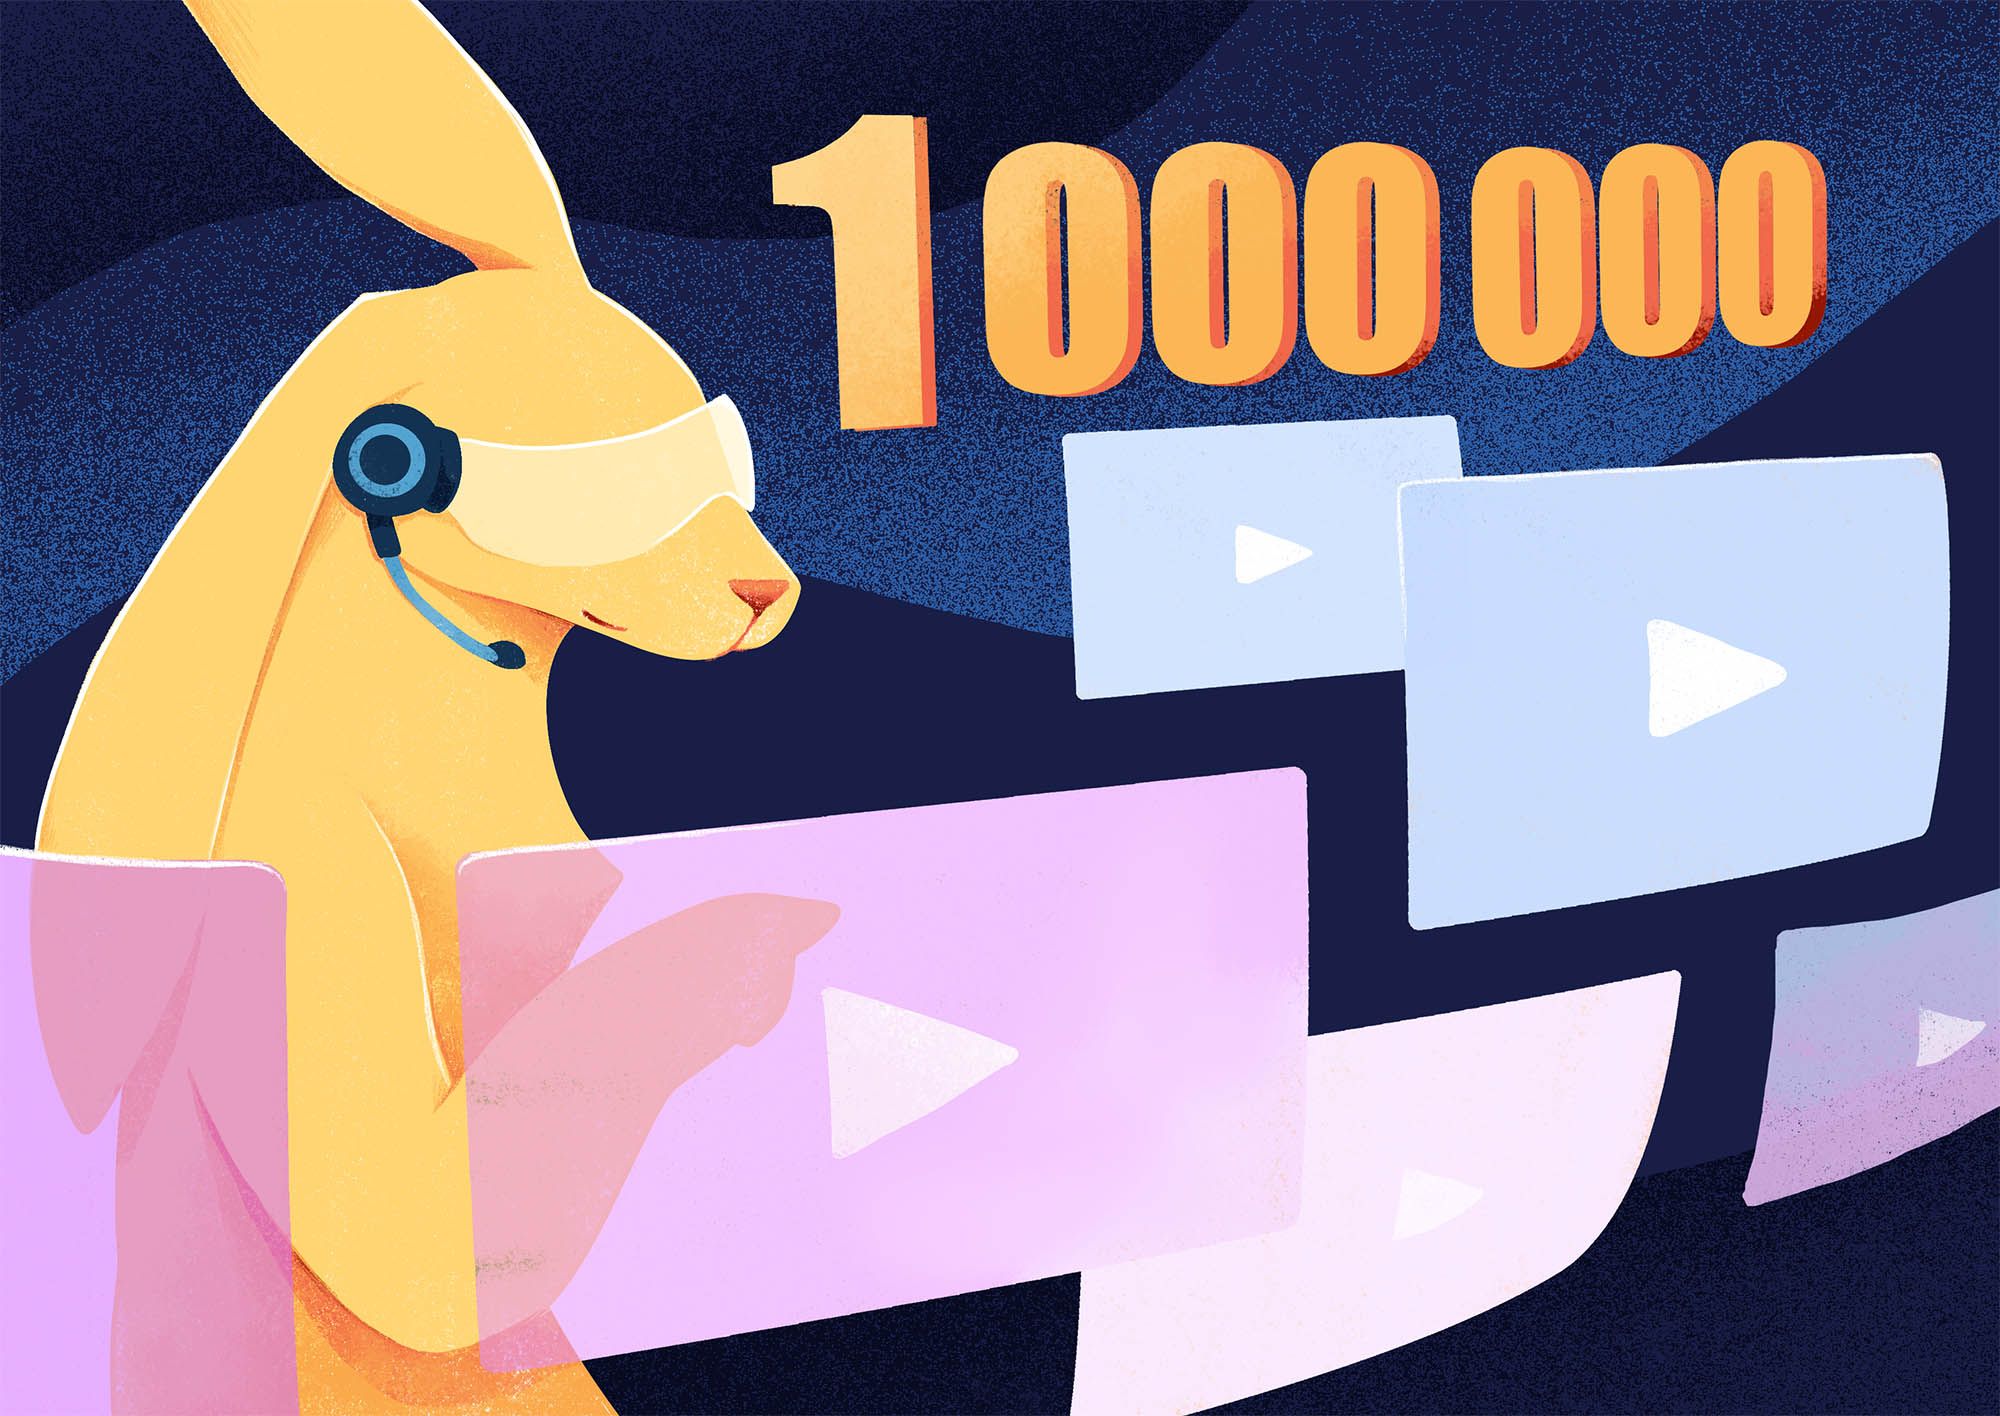 Bunny Stream just reached 1 million videos! What's next?